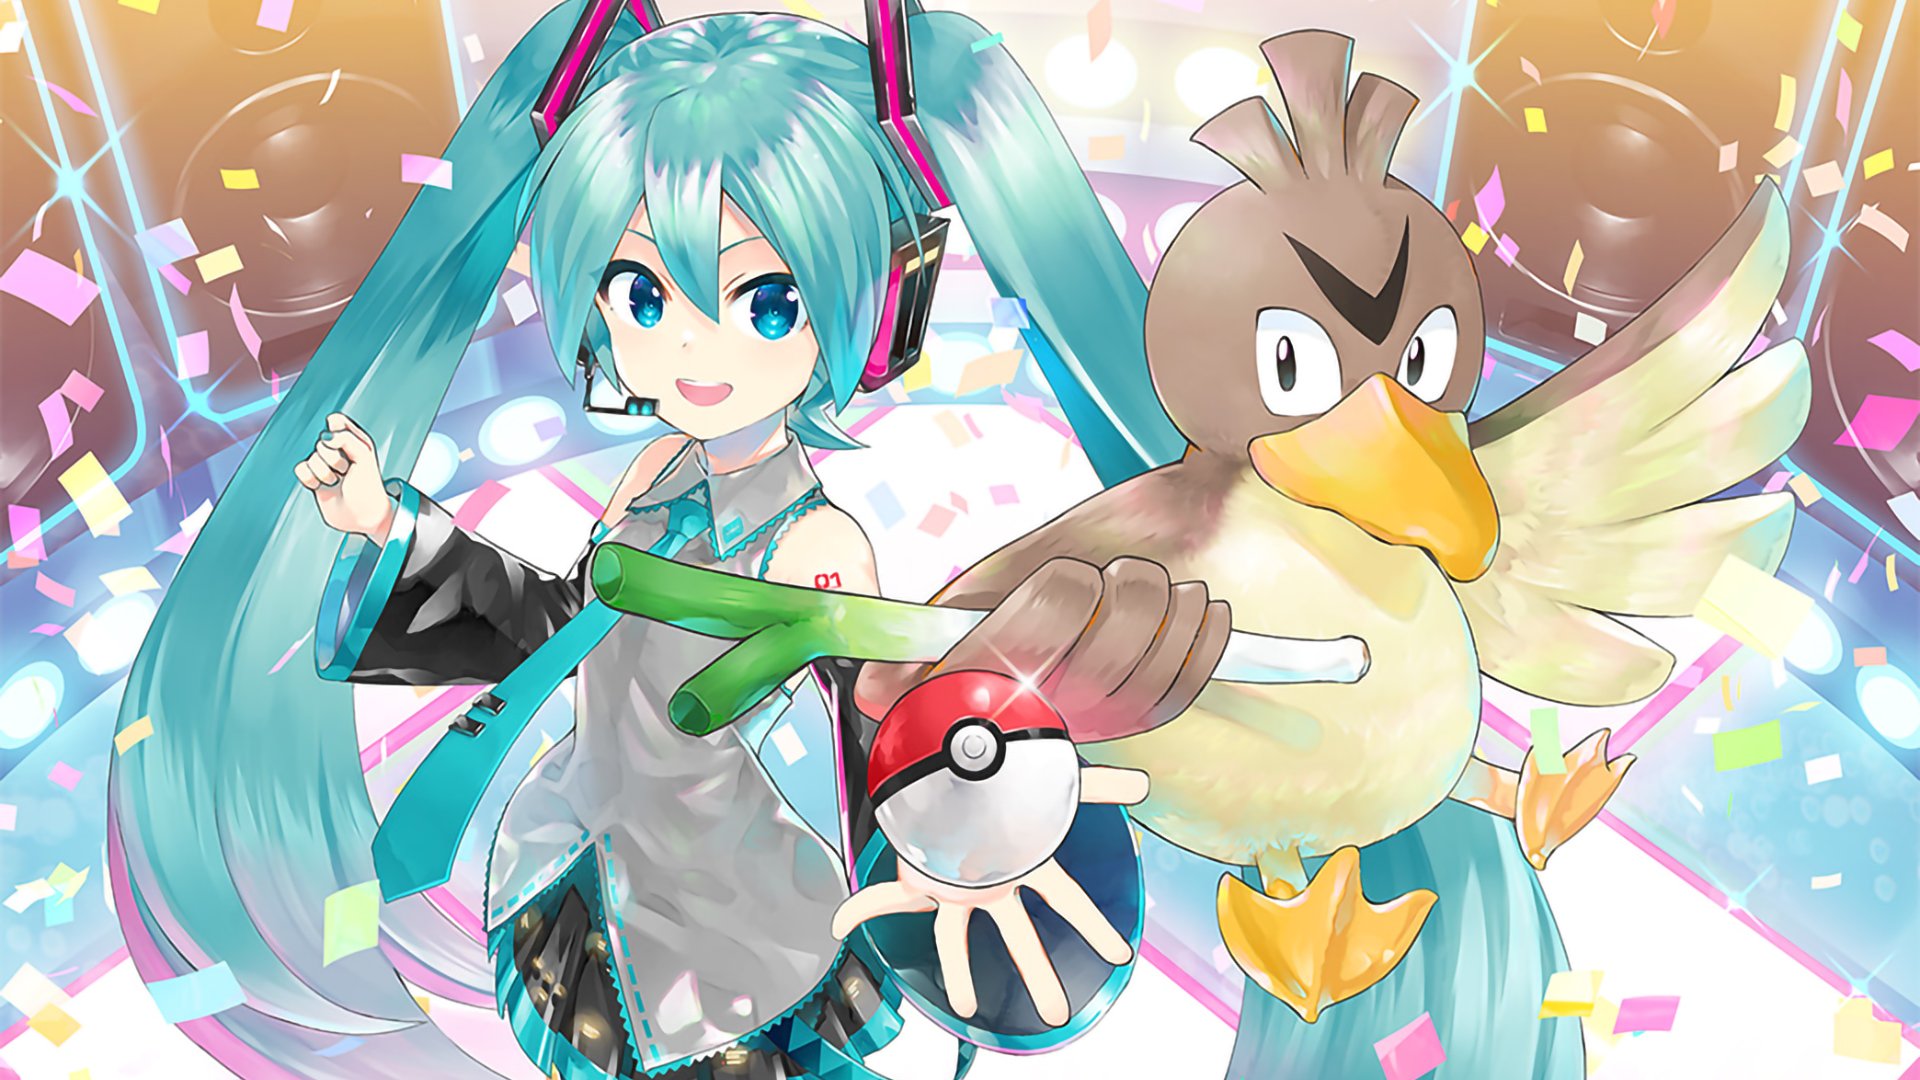 Pokemon X and Pokemon Y review: new life